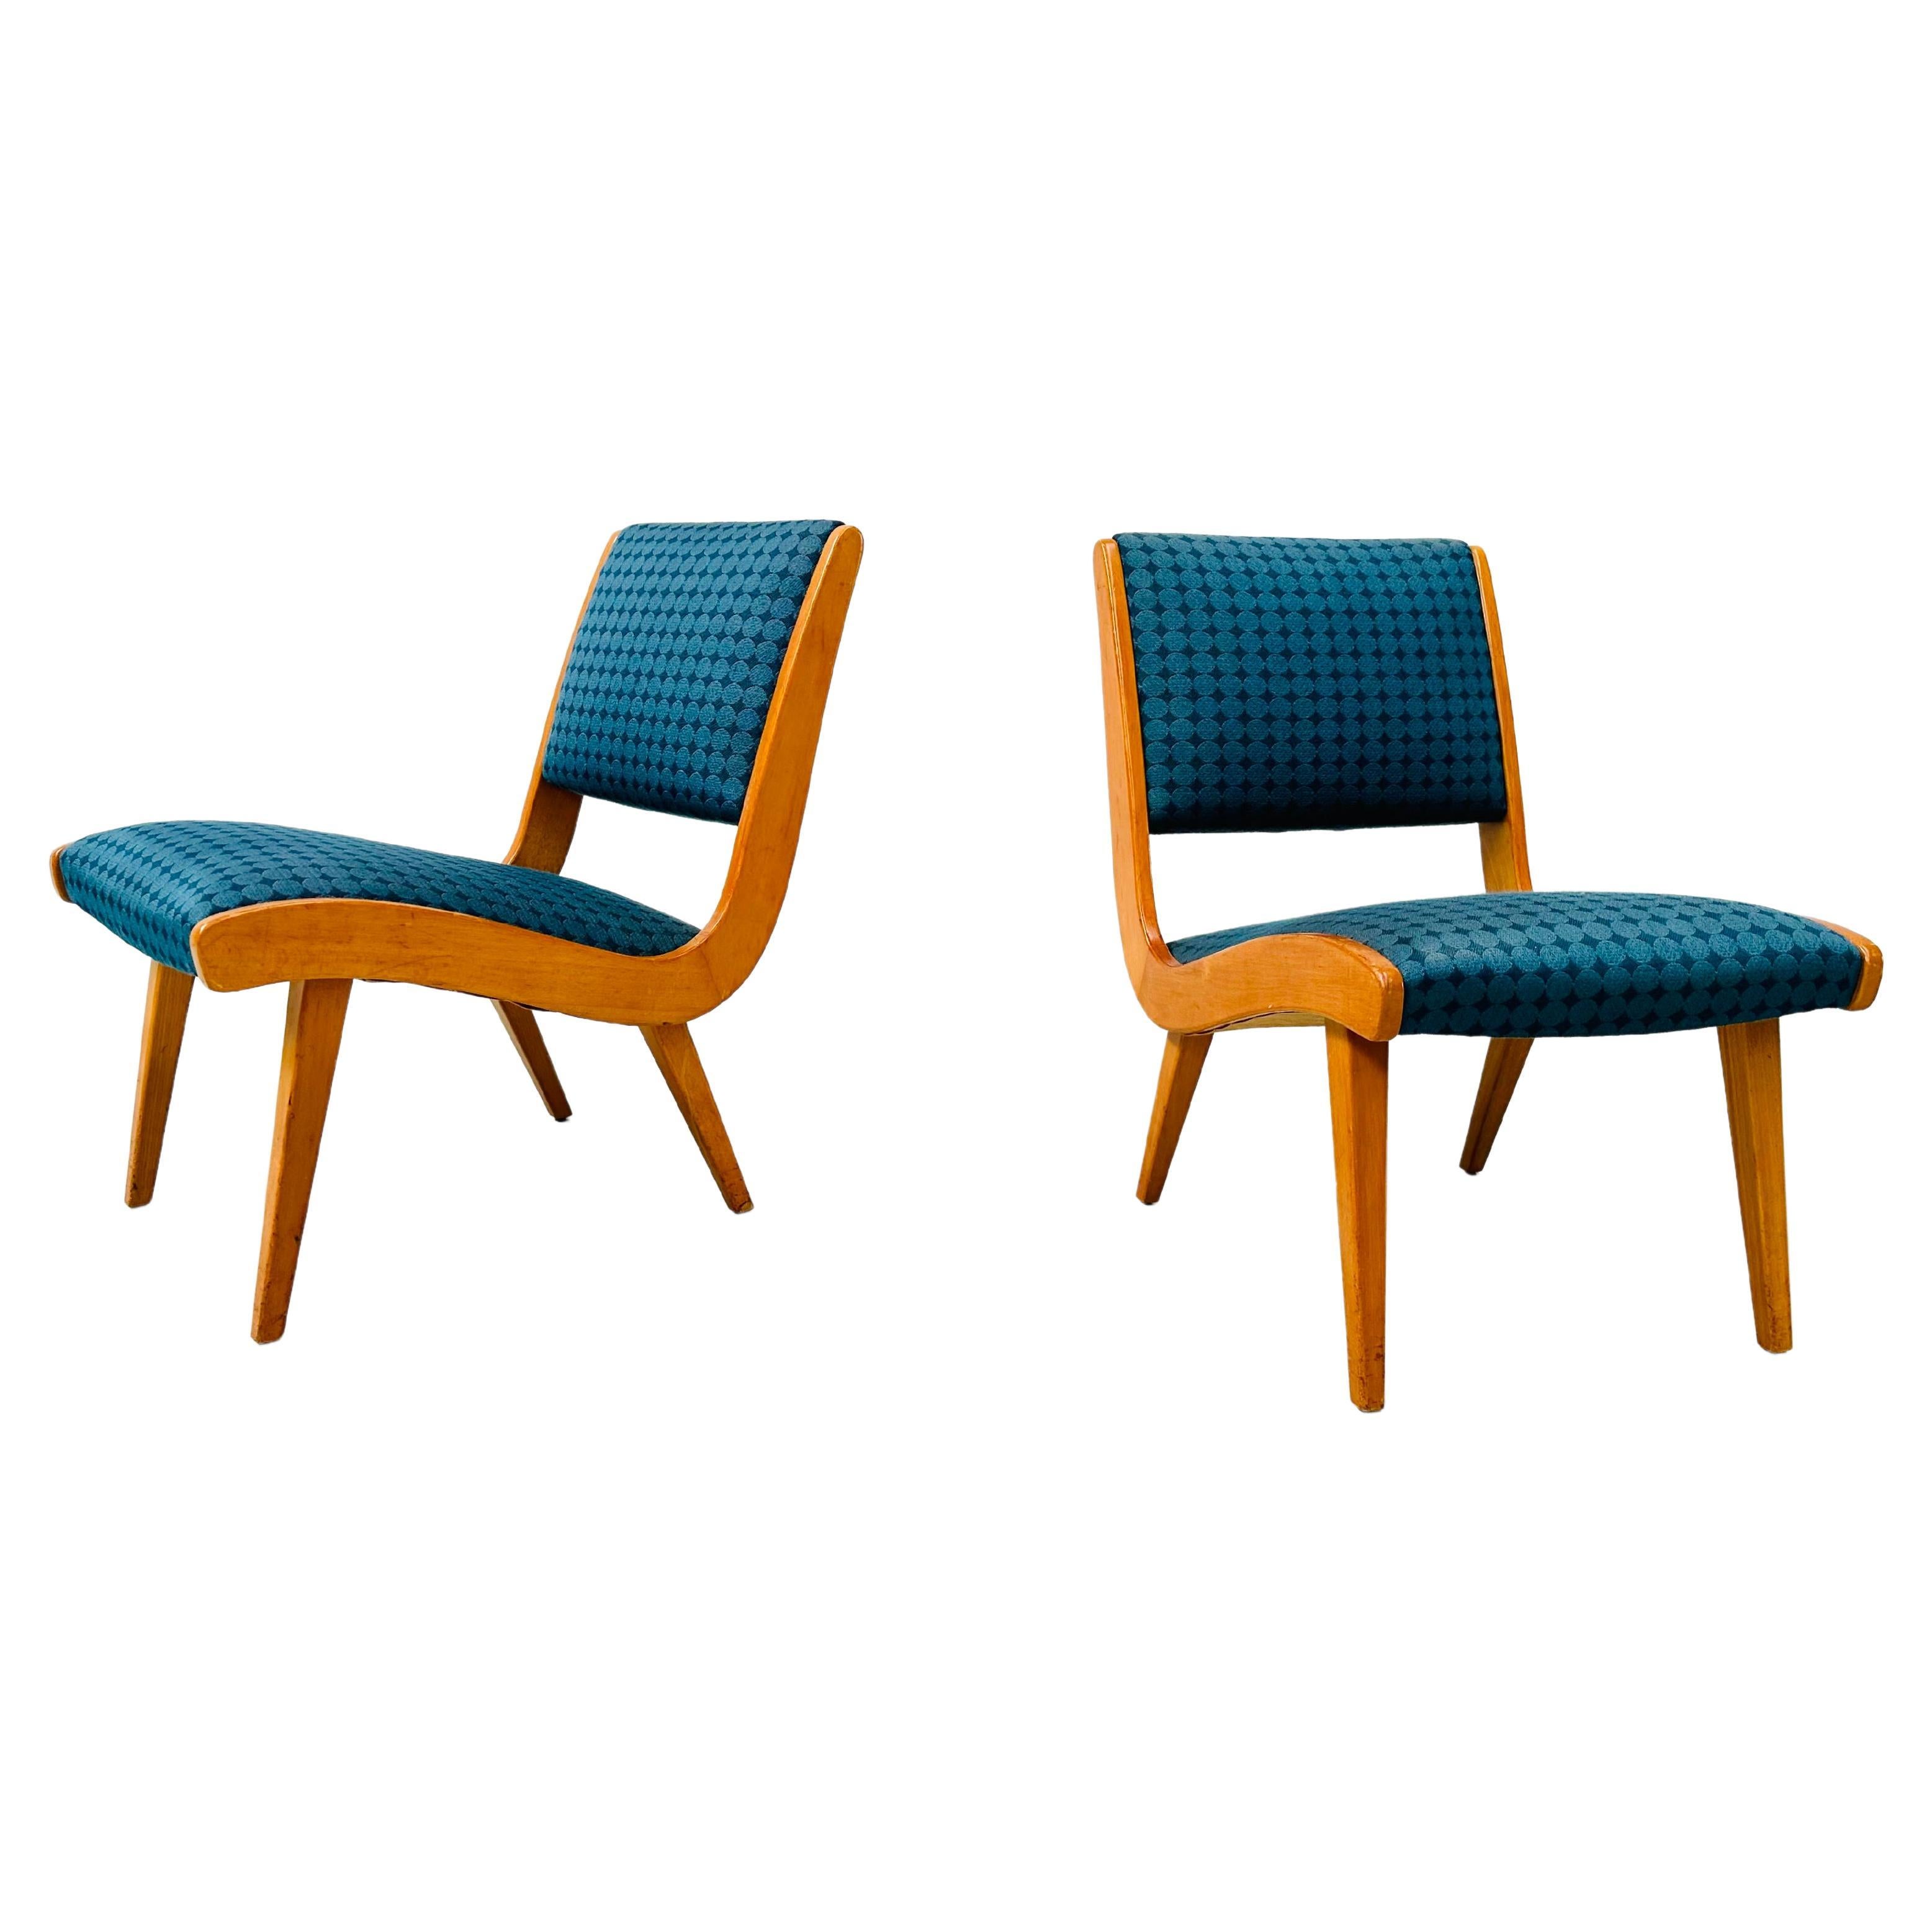 1950s Rare Set Vostra Chairs Numbered & Original Fabric by Jens Risom for Knoll. For Sale